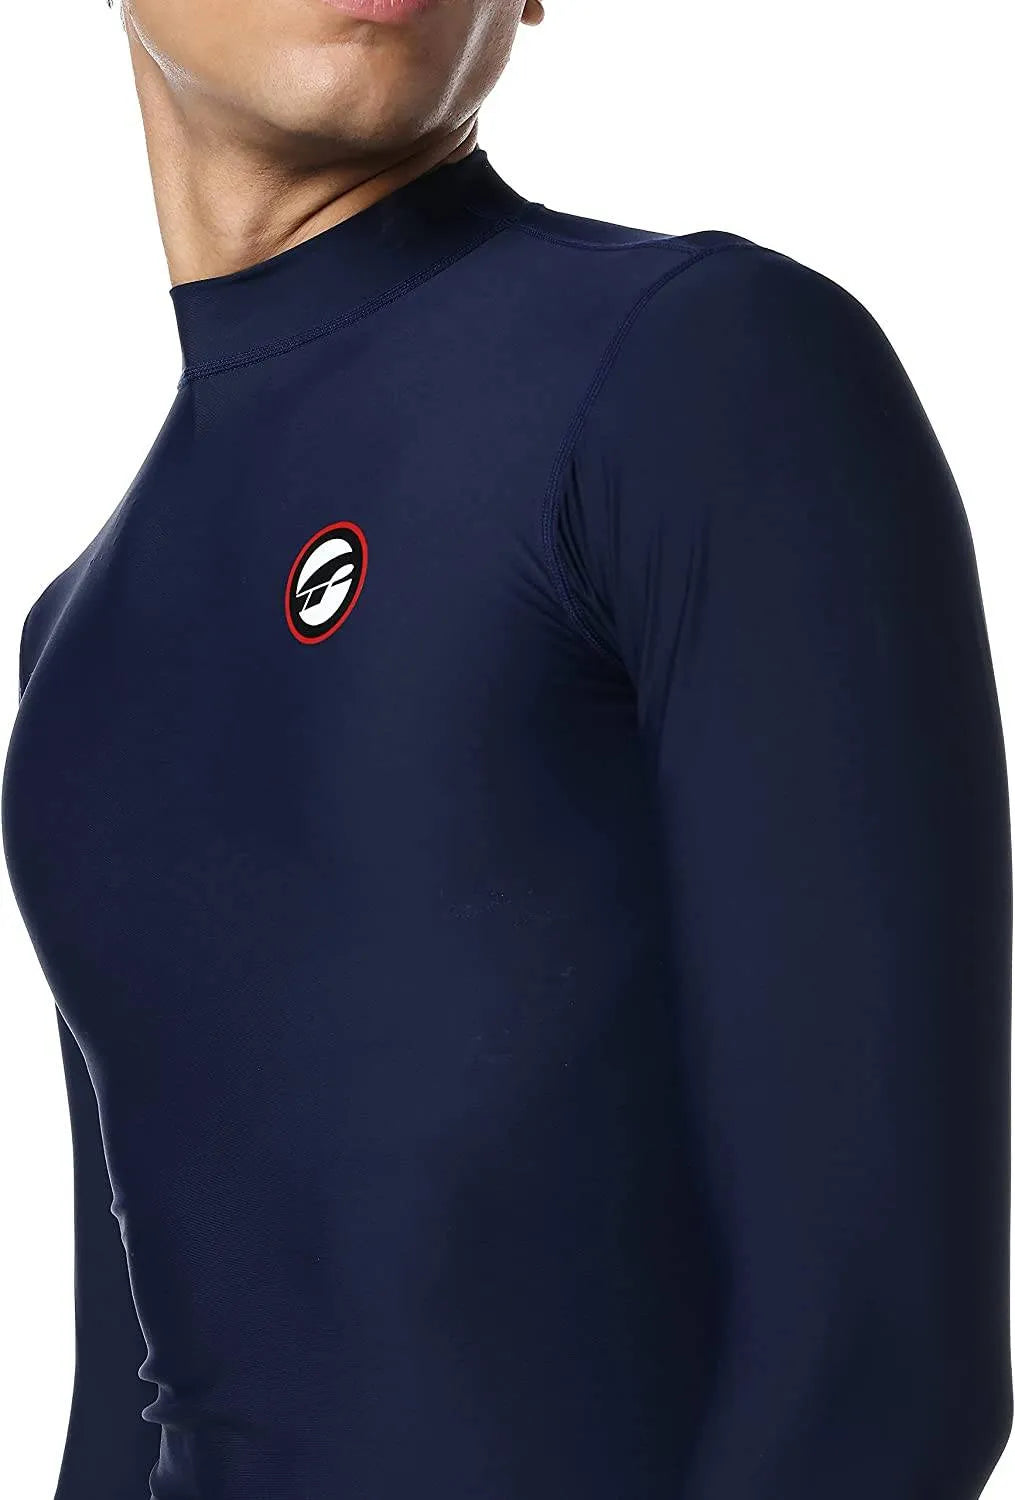 Dive into performance and style with the Prolimit Men's Rashguard, featuring Navy Silk fabric, flat-lock seams, and a modern design.Conquer waves with confidence Prolimit rashguard, Navy Silk ✨, performance & style.